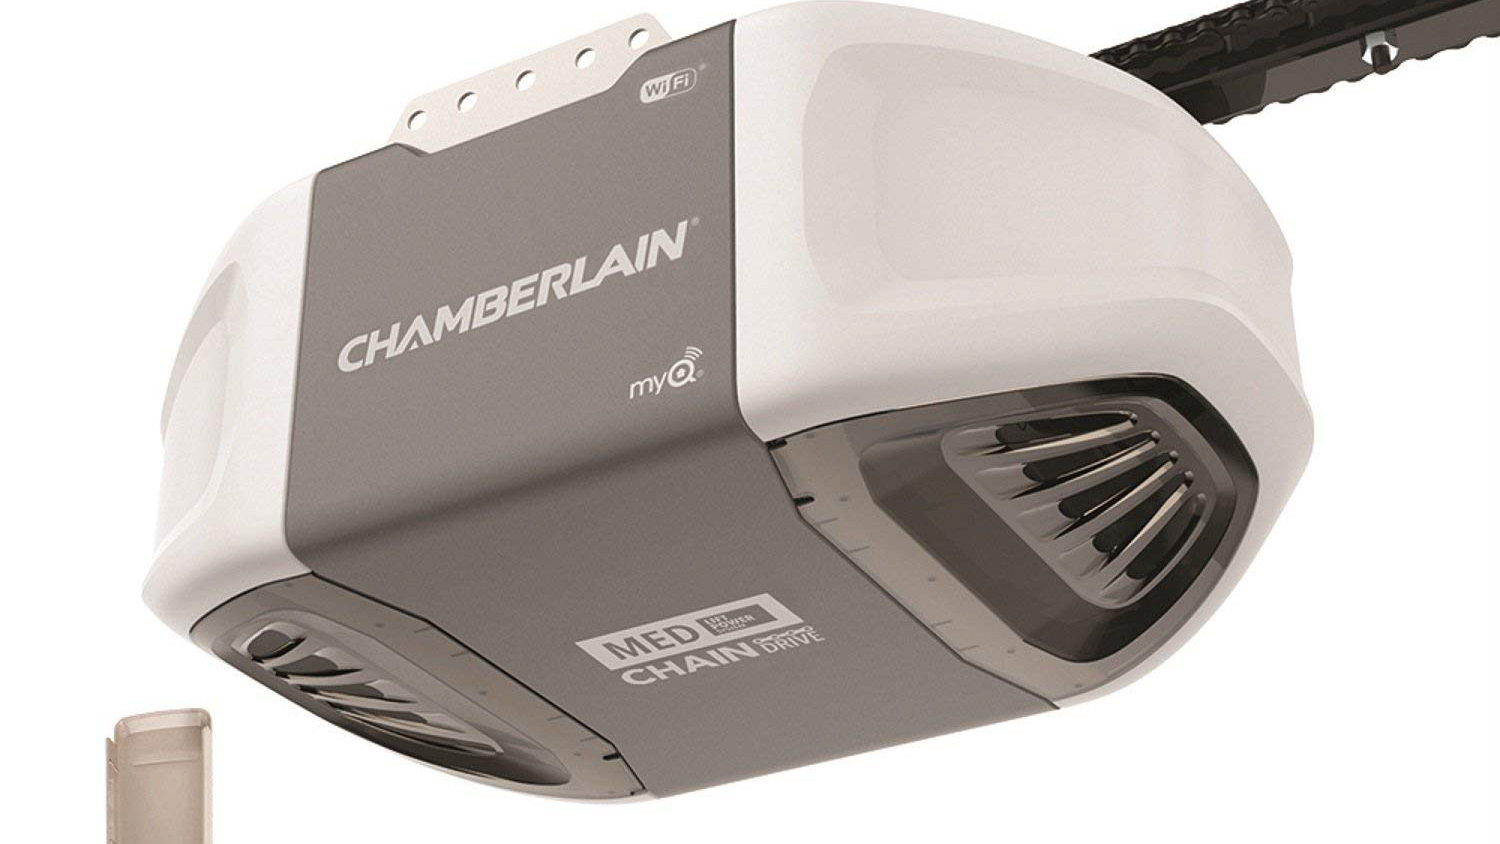 Chamberlain C450, a complete garage door opener system with built-in smarts. Image: Chamberlain.